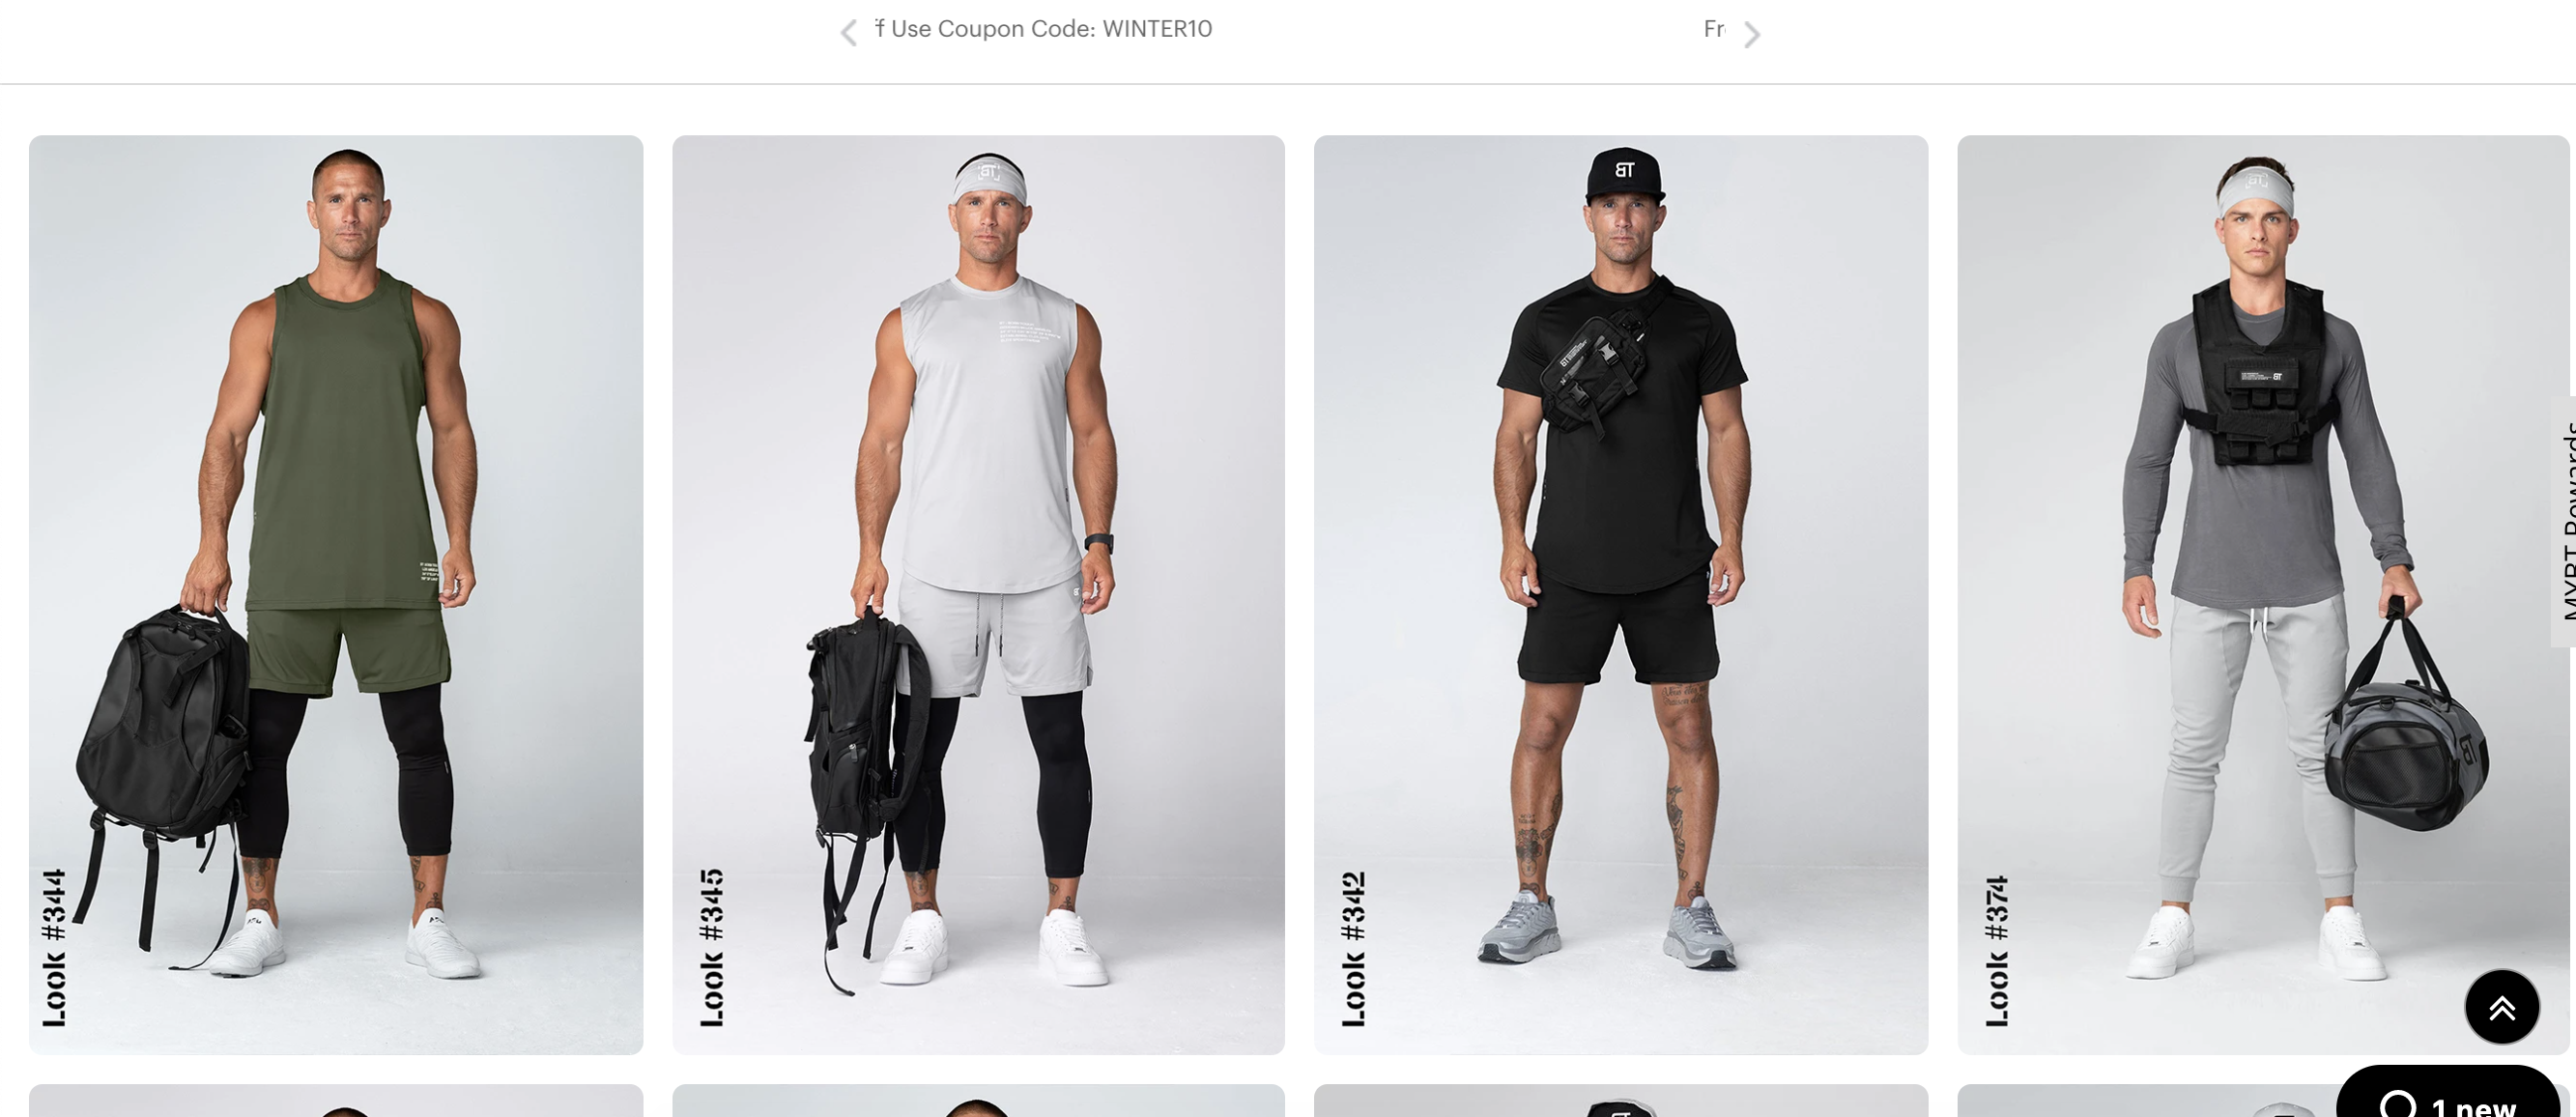 Born Tough: Fitness Apparel Review - hungry and fit